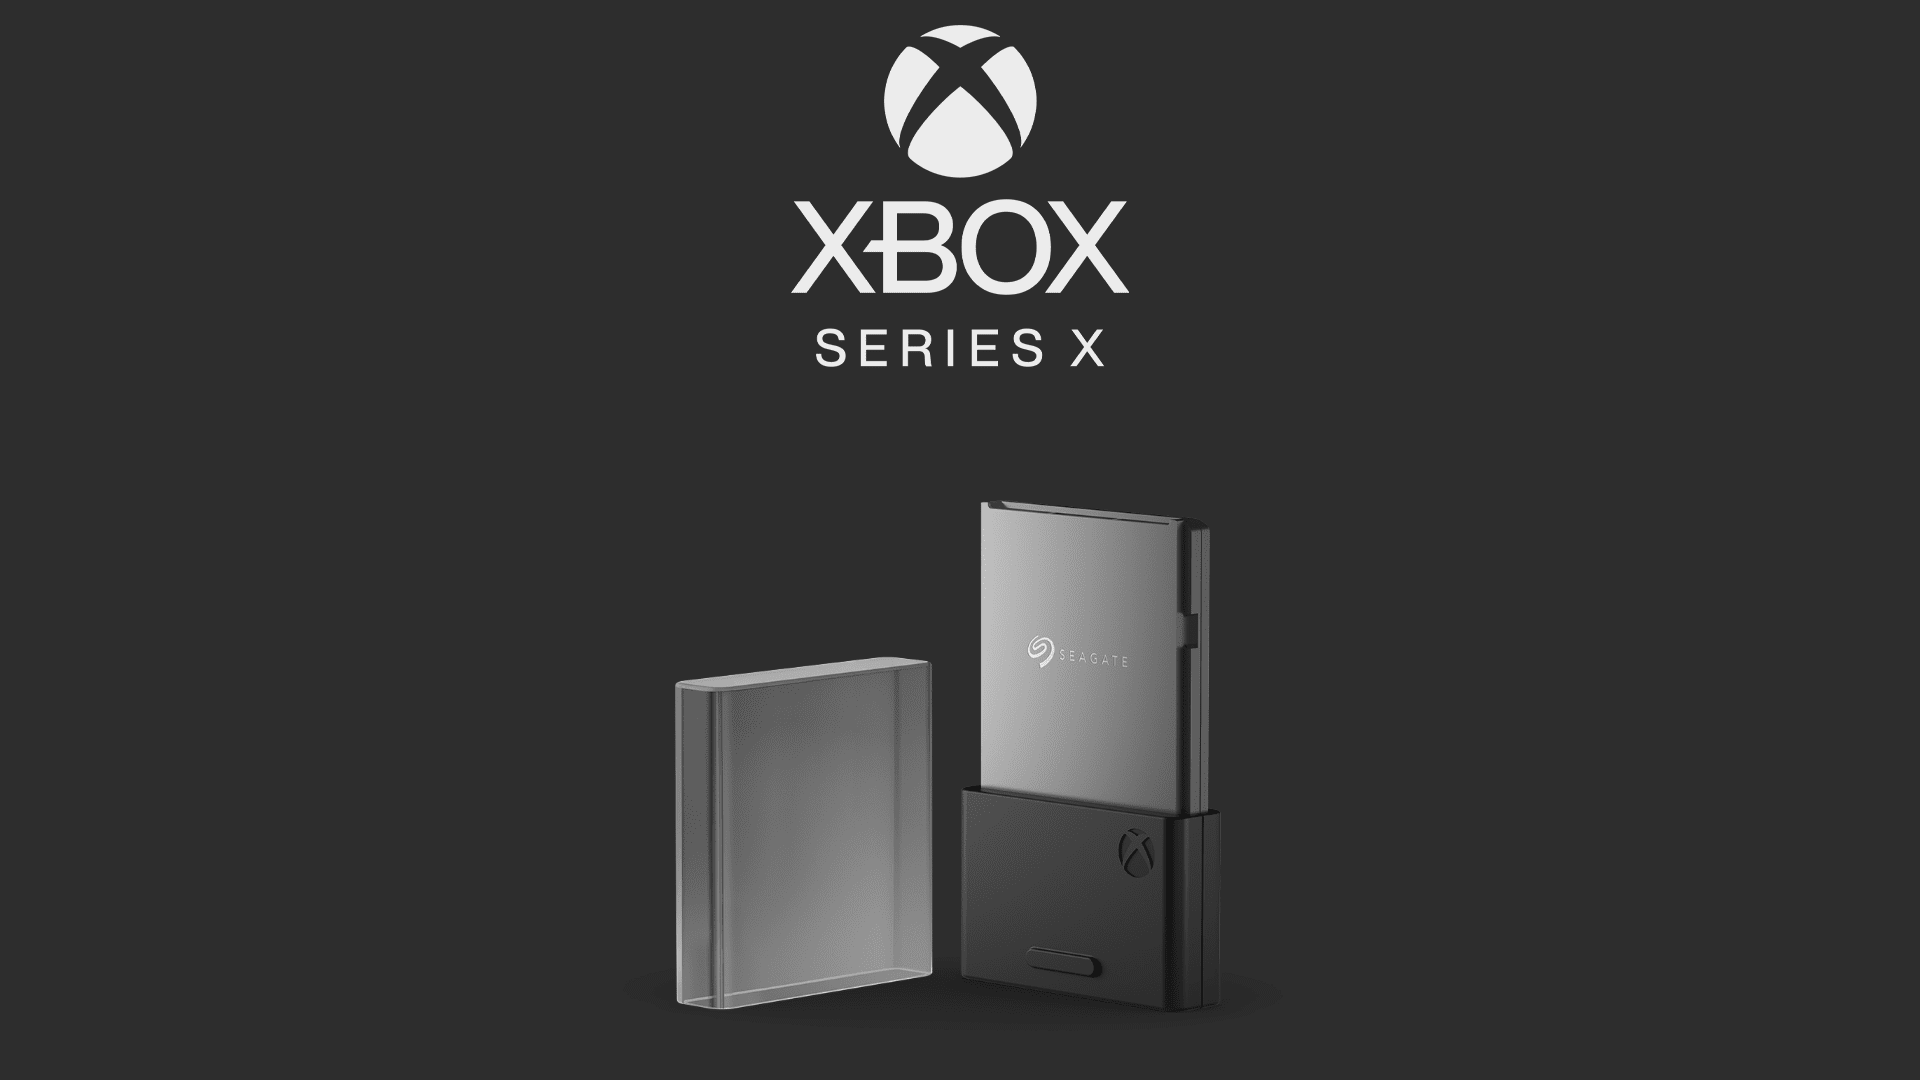 Seagate Storage Expansion Cards For The Xbox Series X Coming In Holiday  2020